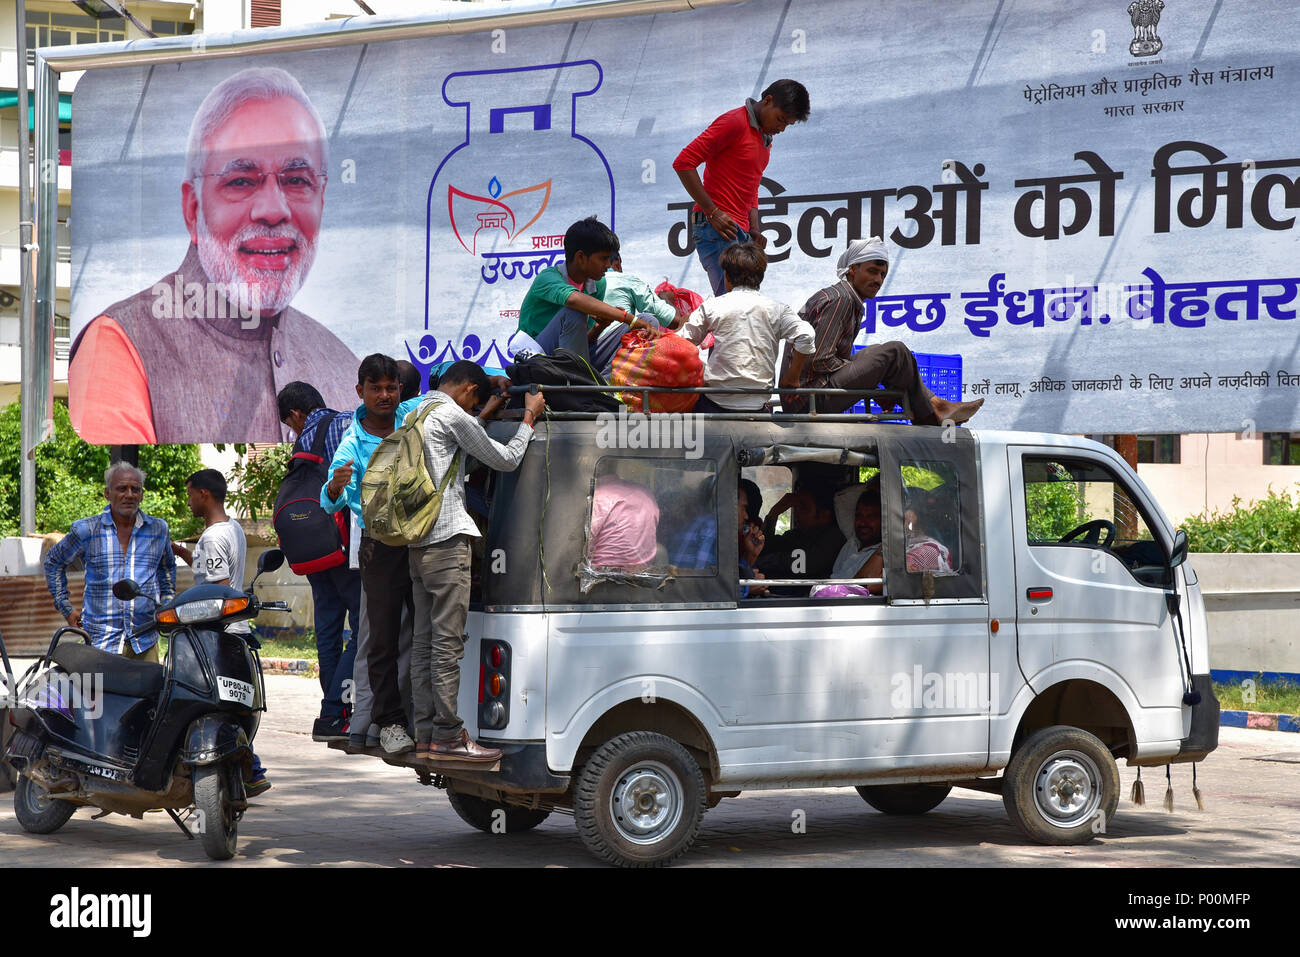 An overloaded car with Modi, the prime minister of India, on the advertisement at the background Stock Photo